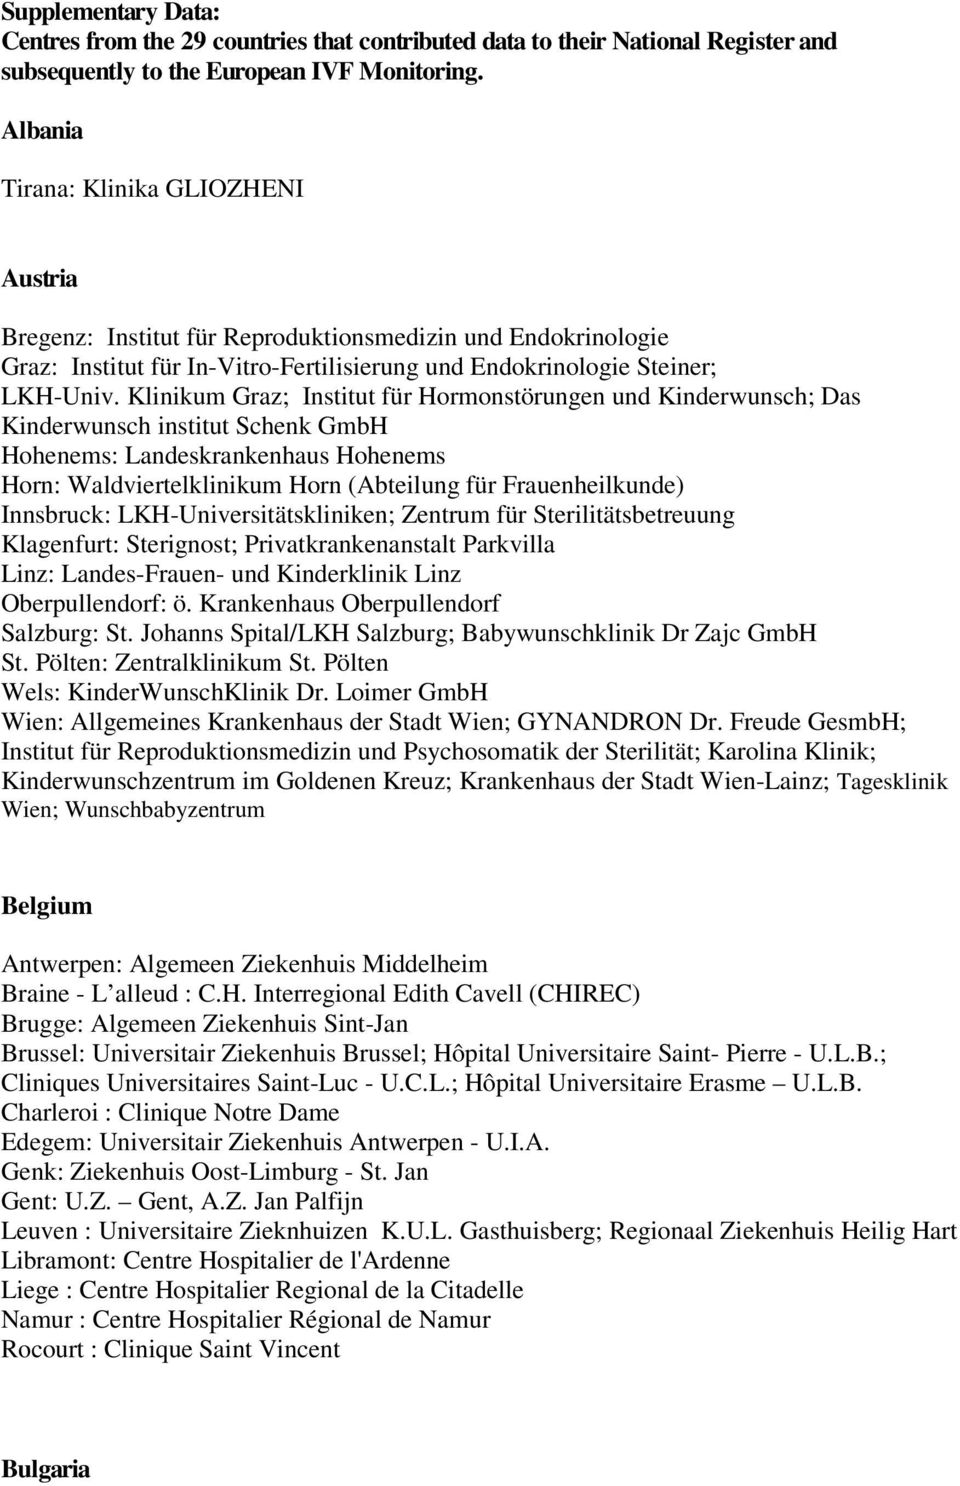 Supplementary Data Centres From The 29 Countries That Contributed Data To Their National Register And Subsequently To The European Ivf Monitoring Pdf Kostenfreier Download